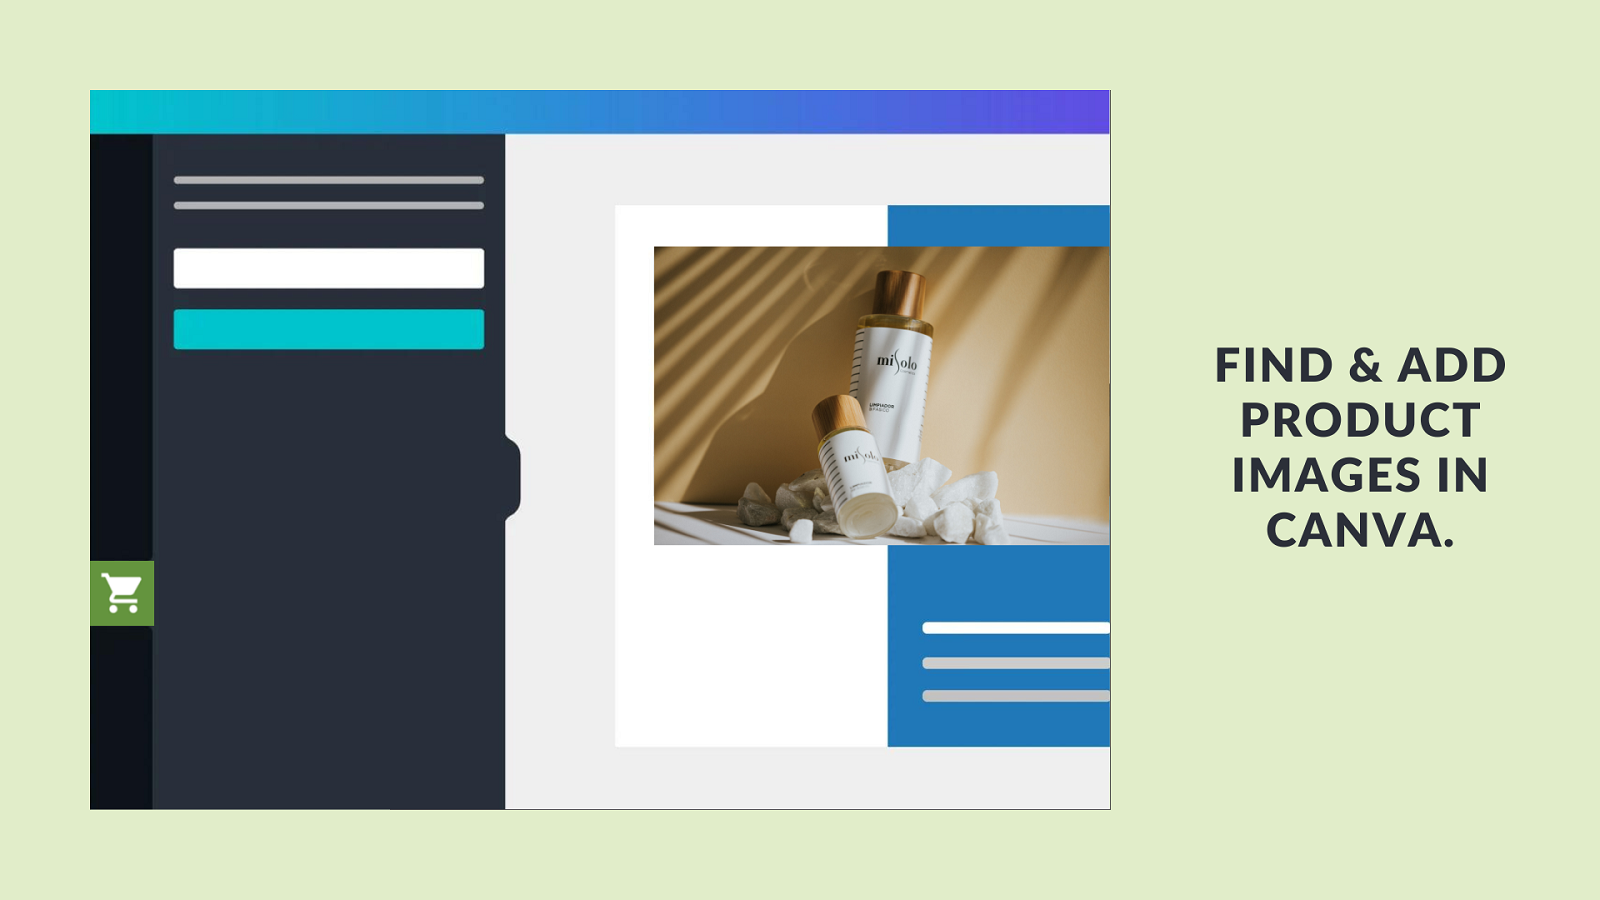 Find & Add Product Images in Canva.